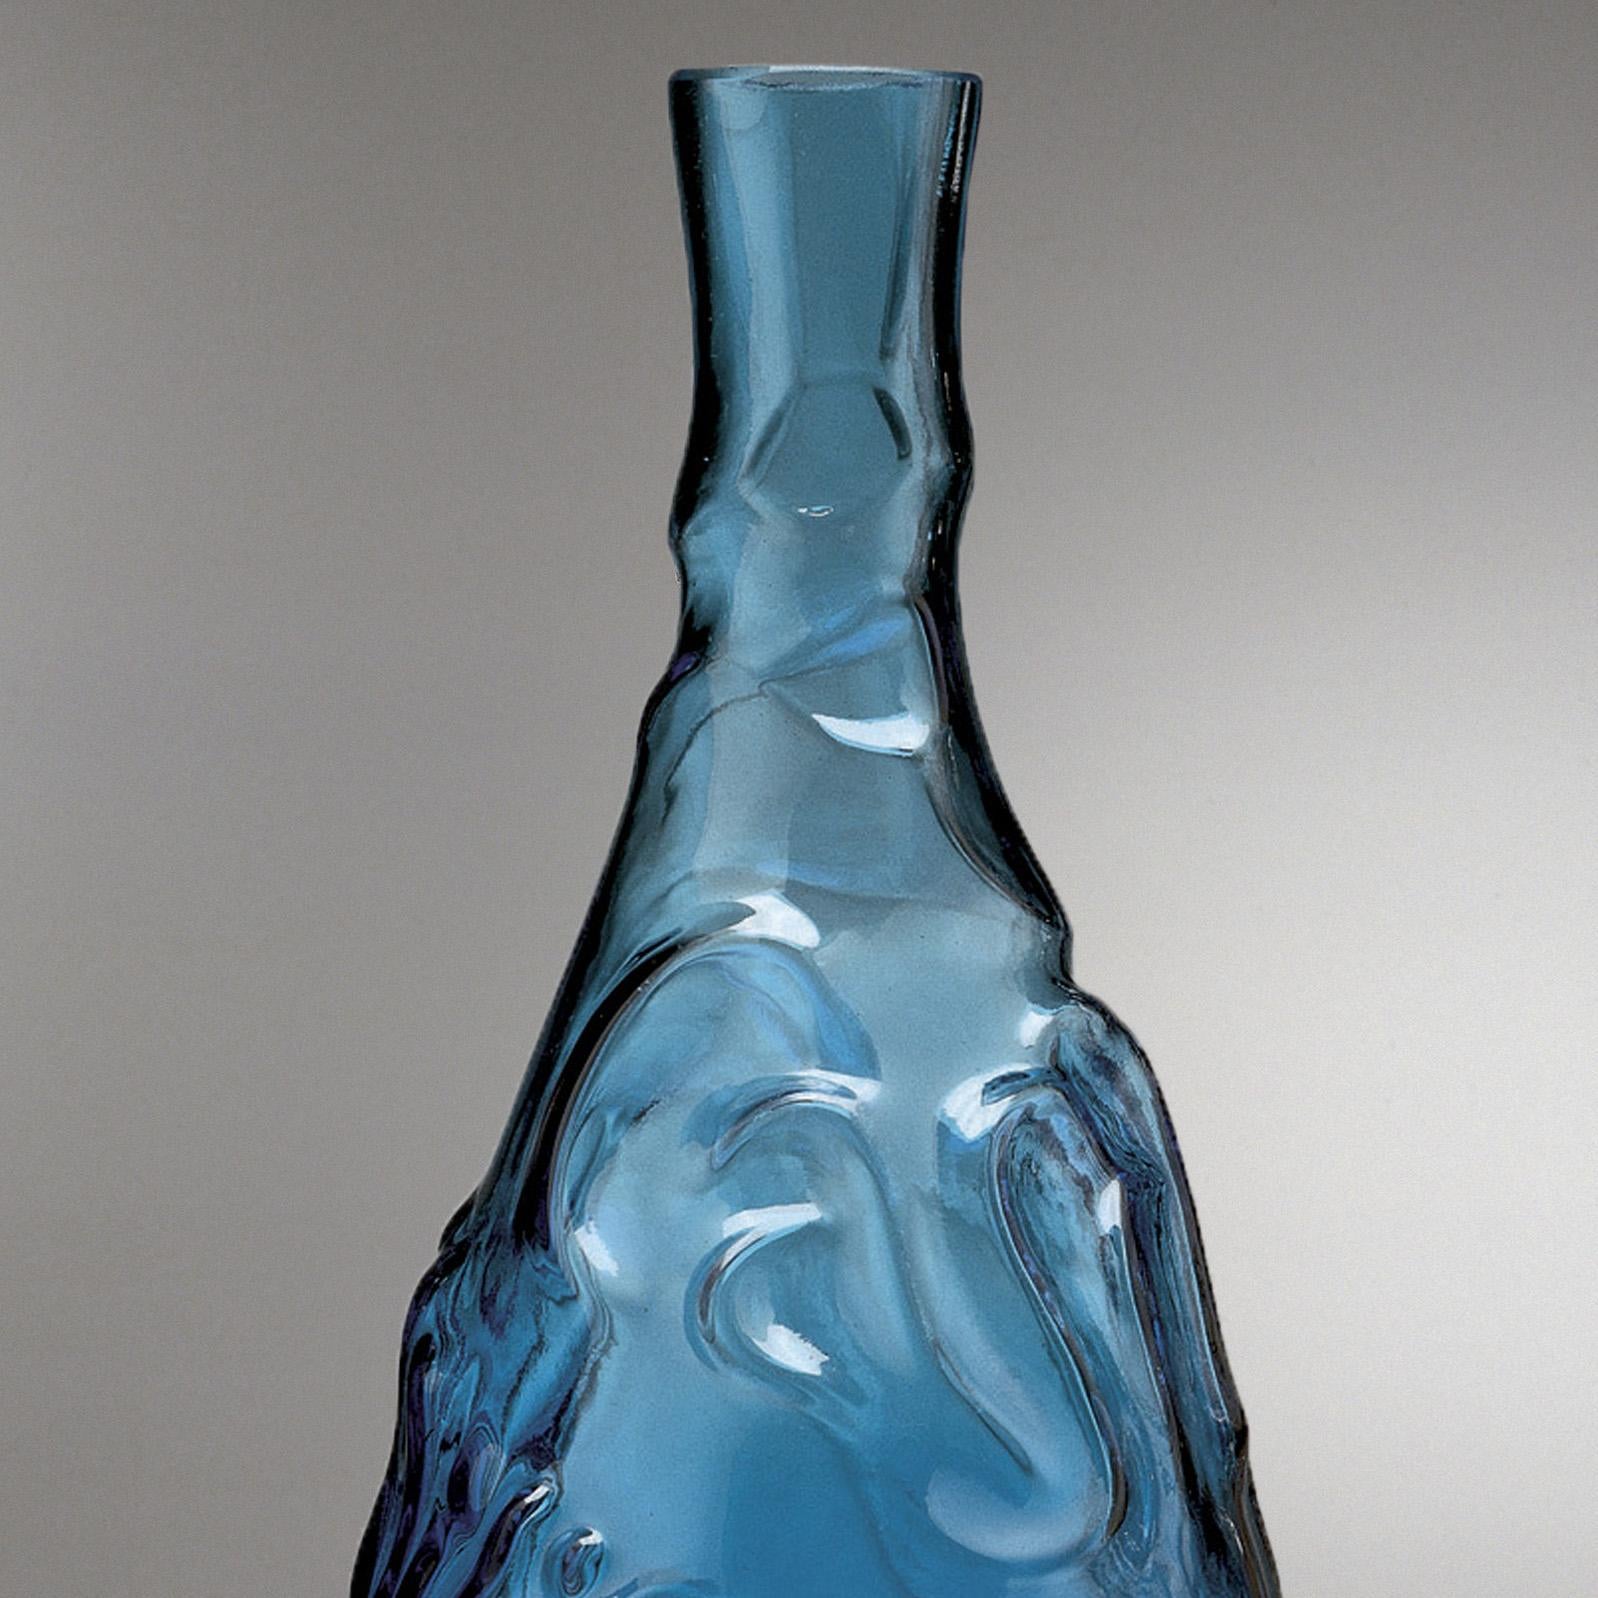 The architect Josep Maria Jujol was the closest collaborator with Antoni Gaudi. He designed the Casa de Familia Bottle in 1912, and more than a century later it’s still going strong.

The bottles has an approximate capacity of 1.2L. 

Measures: